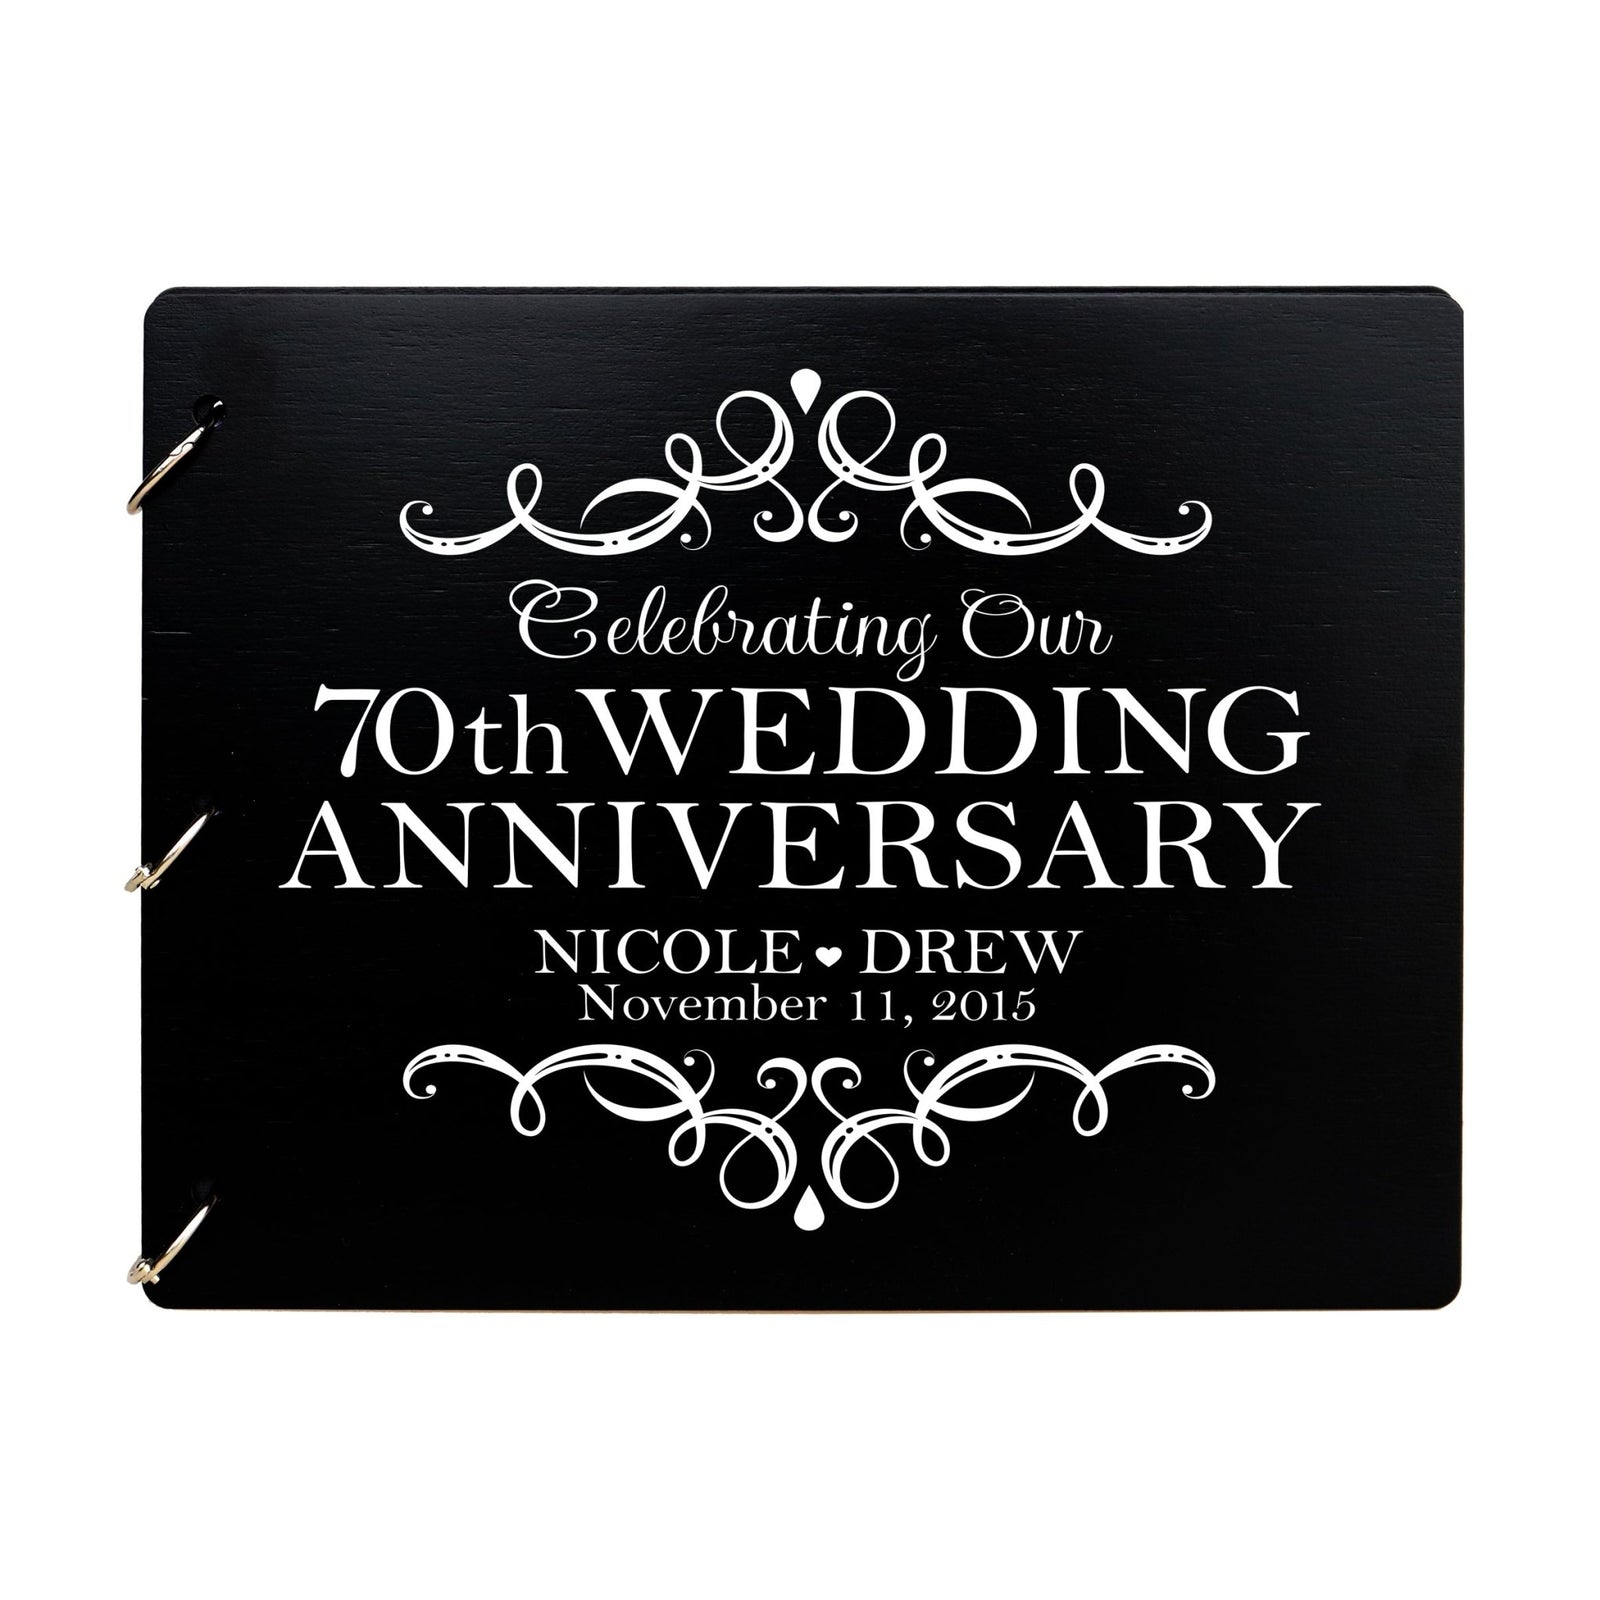 Personalized Guest Book Sign for 70th Wedding Anniversary - Celebrating - LifeSong Milestones